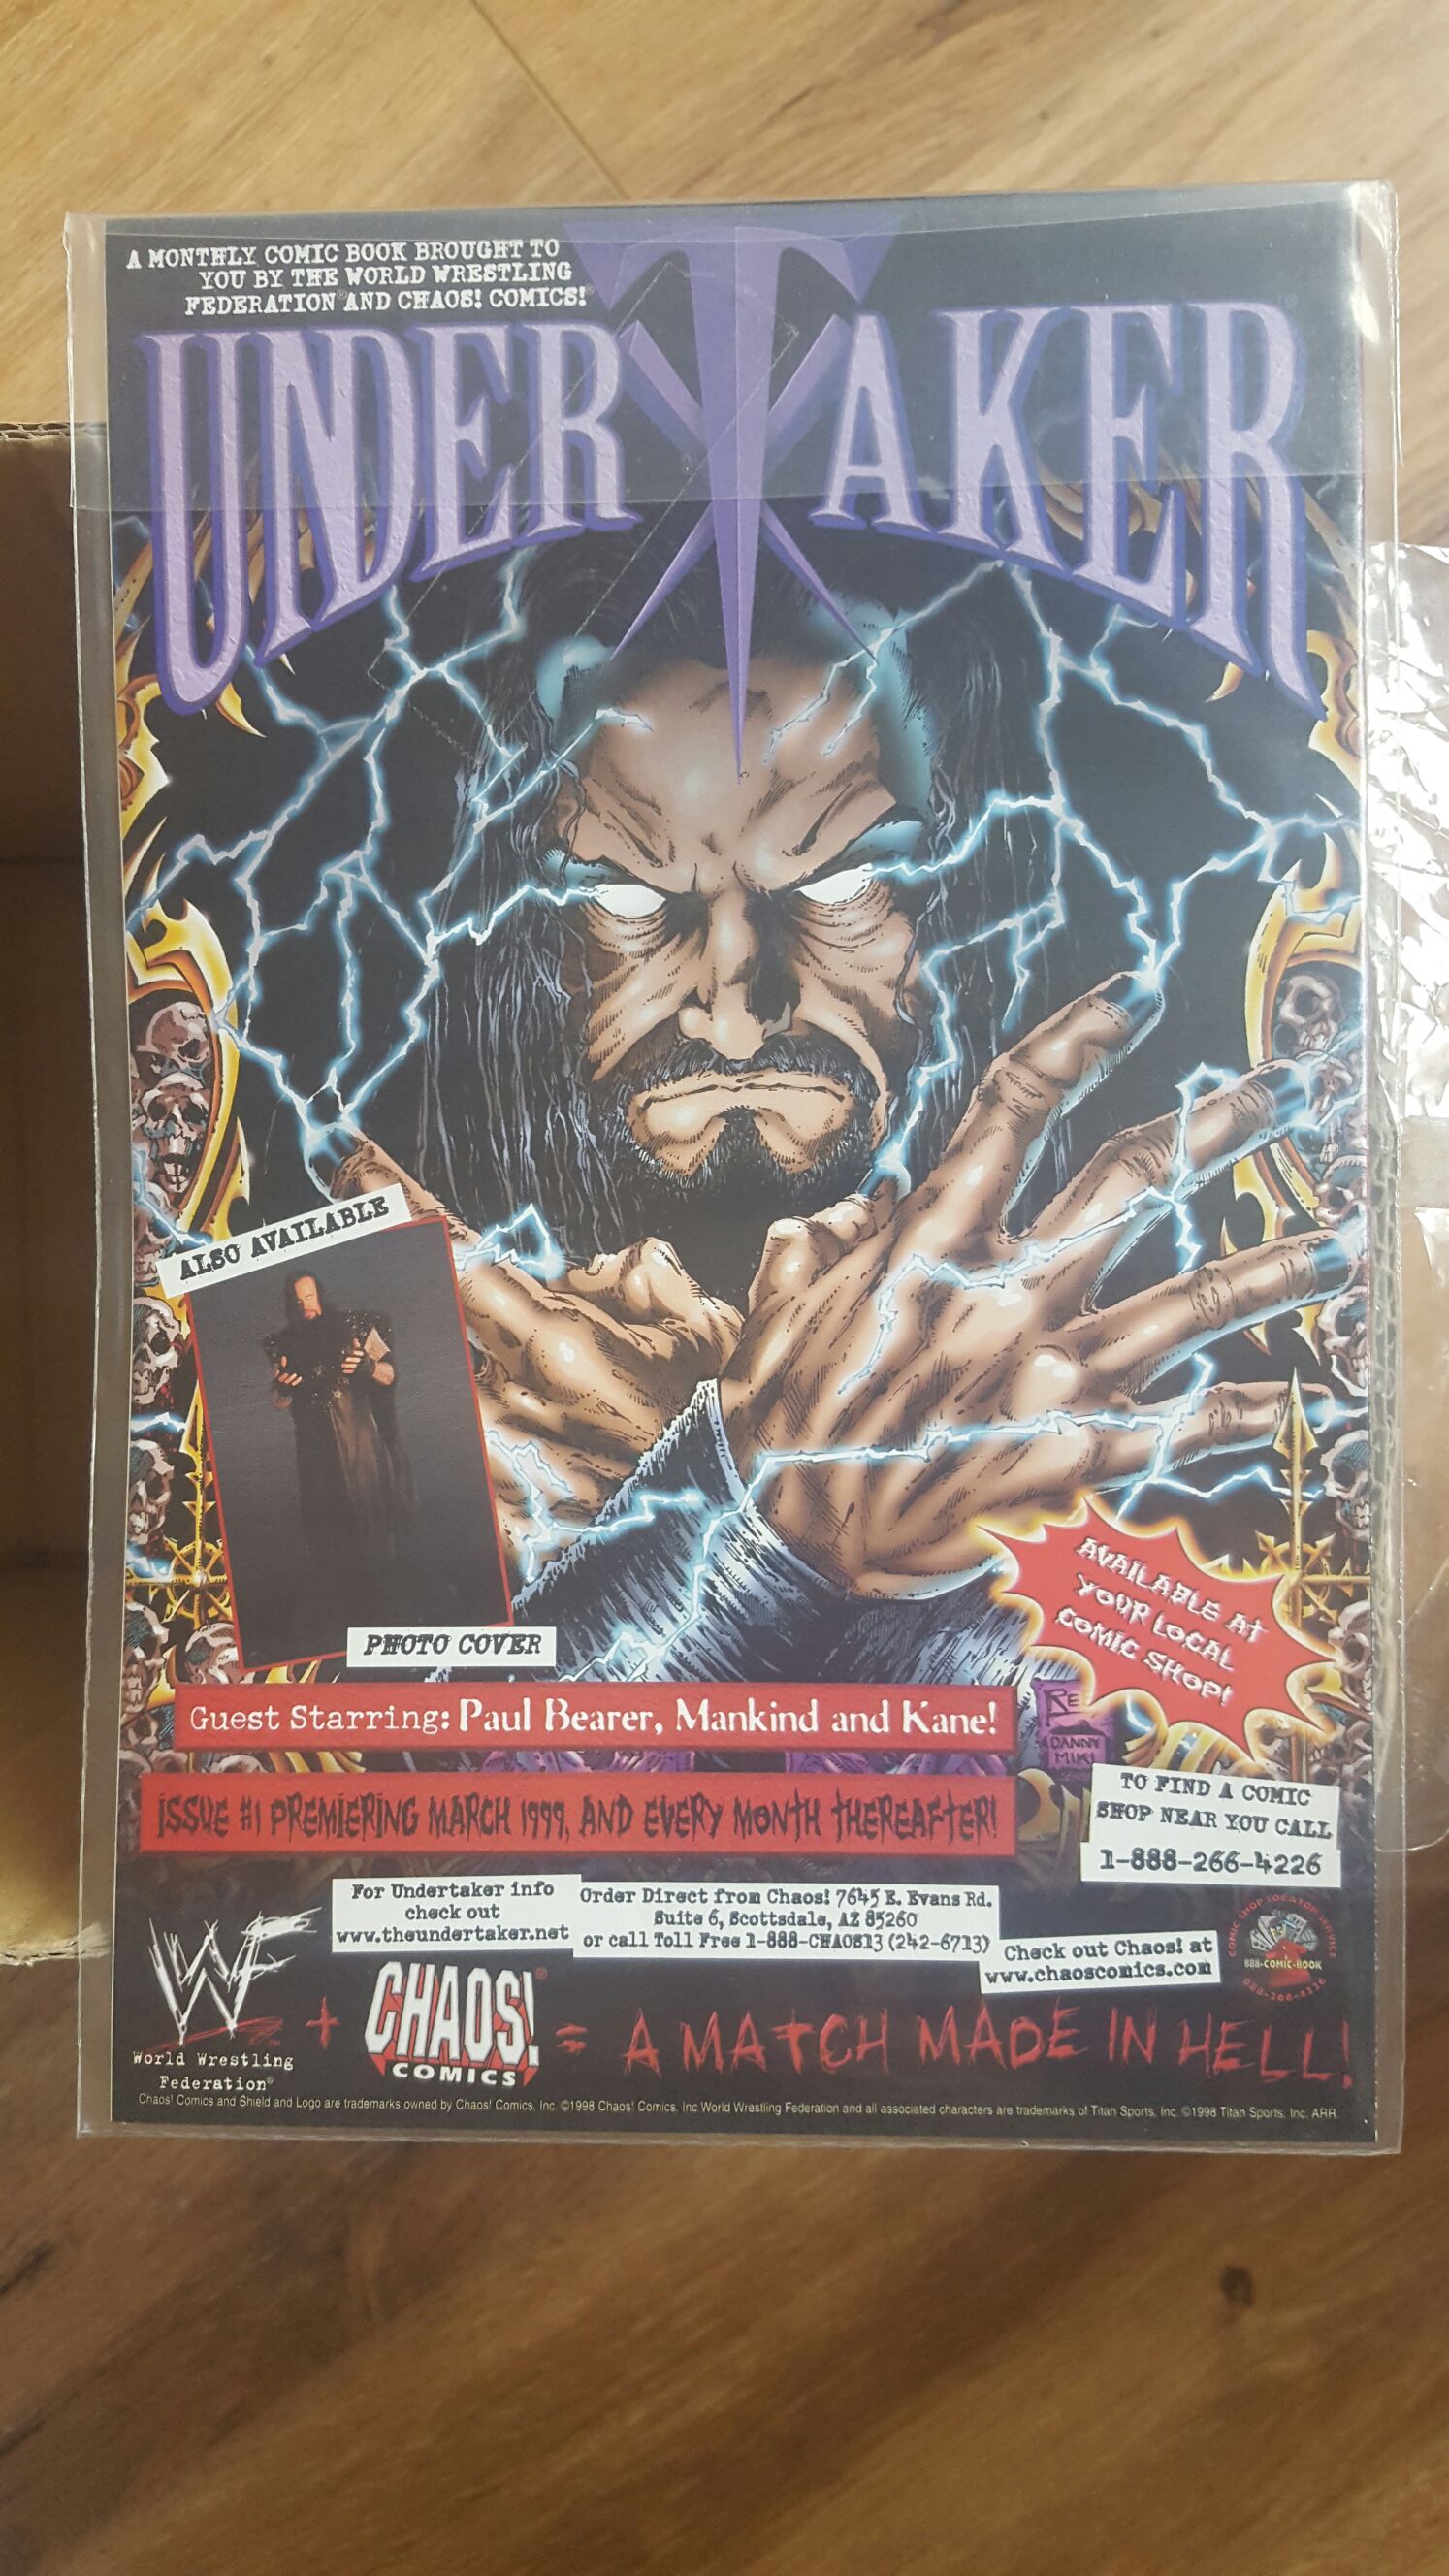 Undertaker - Chaos Comics/World Wrestling Federation (0) comic book collectible - Main Image 2